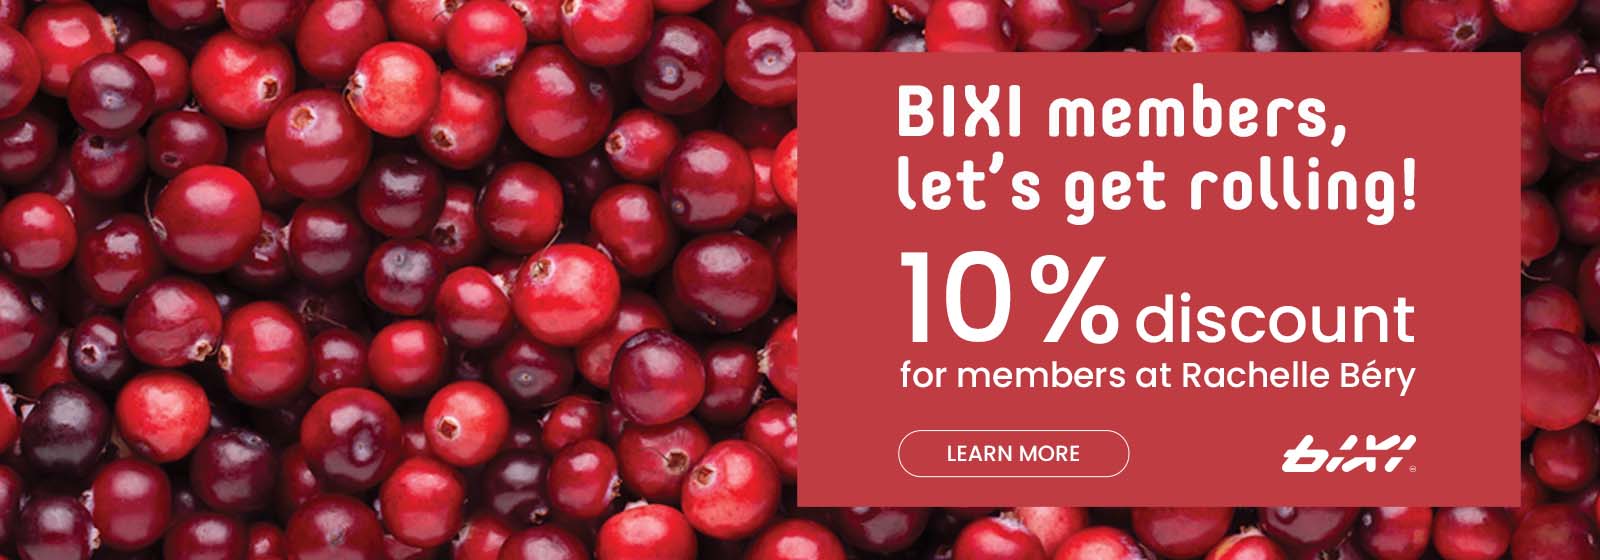 Text Reading 'BIXI members, let's get rolling! Get a 10% discount for members at Rachelle Béry. Know more details from the 'Learn More' button given below.'